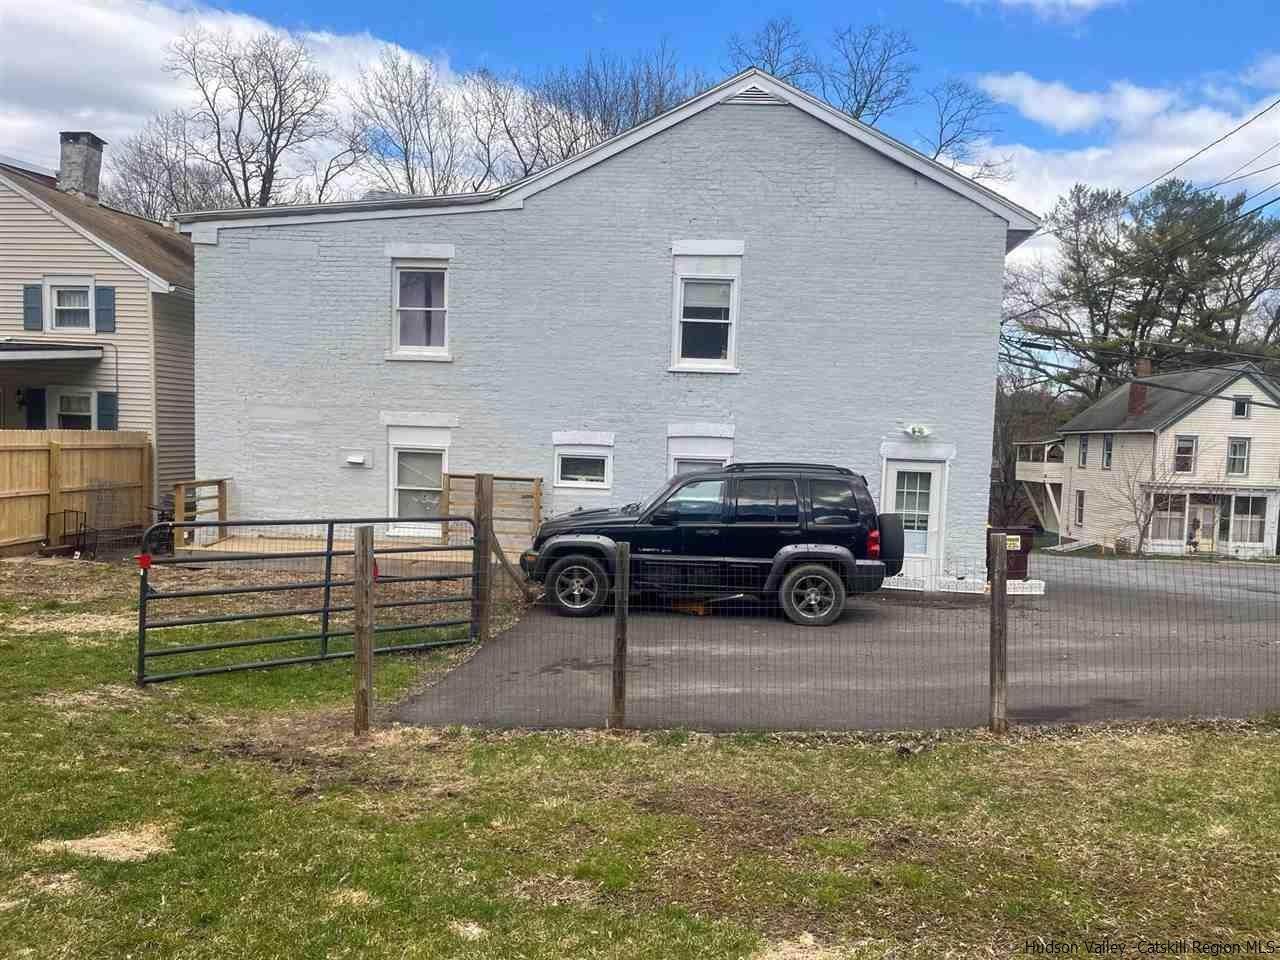 9. Two Family for Sale at 36 E Bridge Street Saugerties, New York 12477 United States